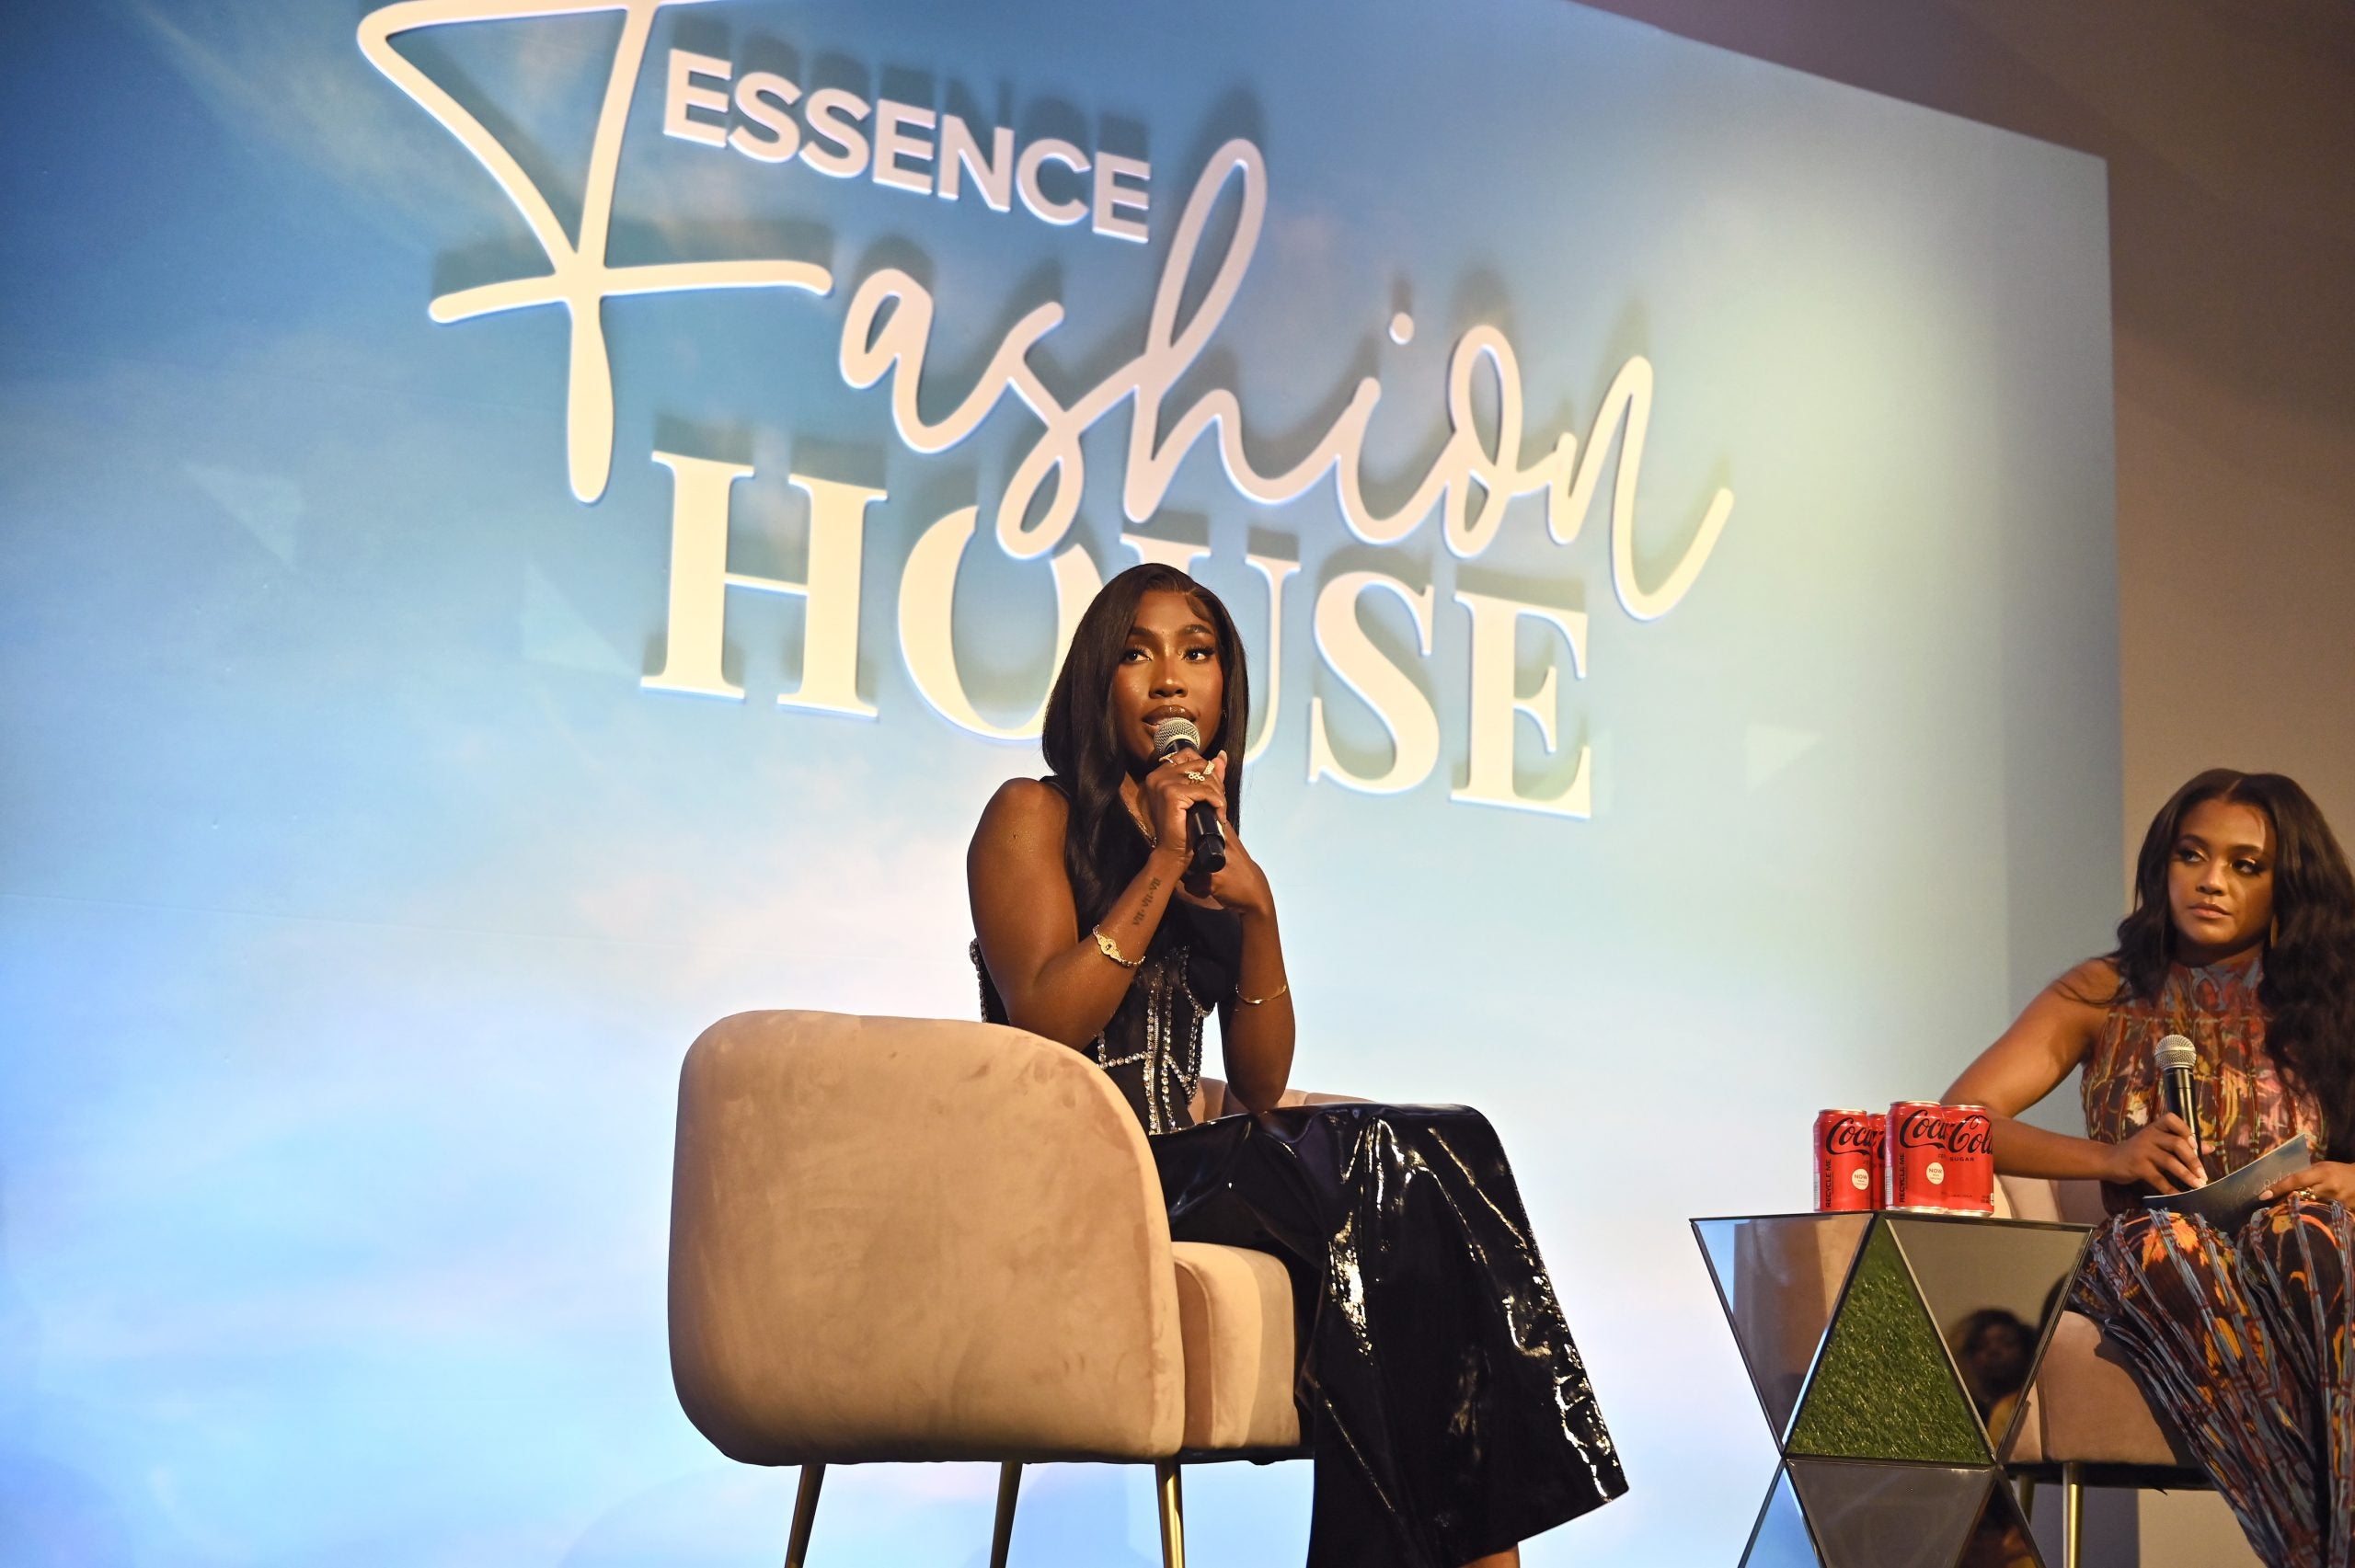 Sevyn Streeter On Her Style: 'I Like To Record And Write According To How I Feel & What I Wear That Day'